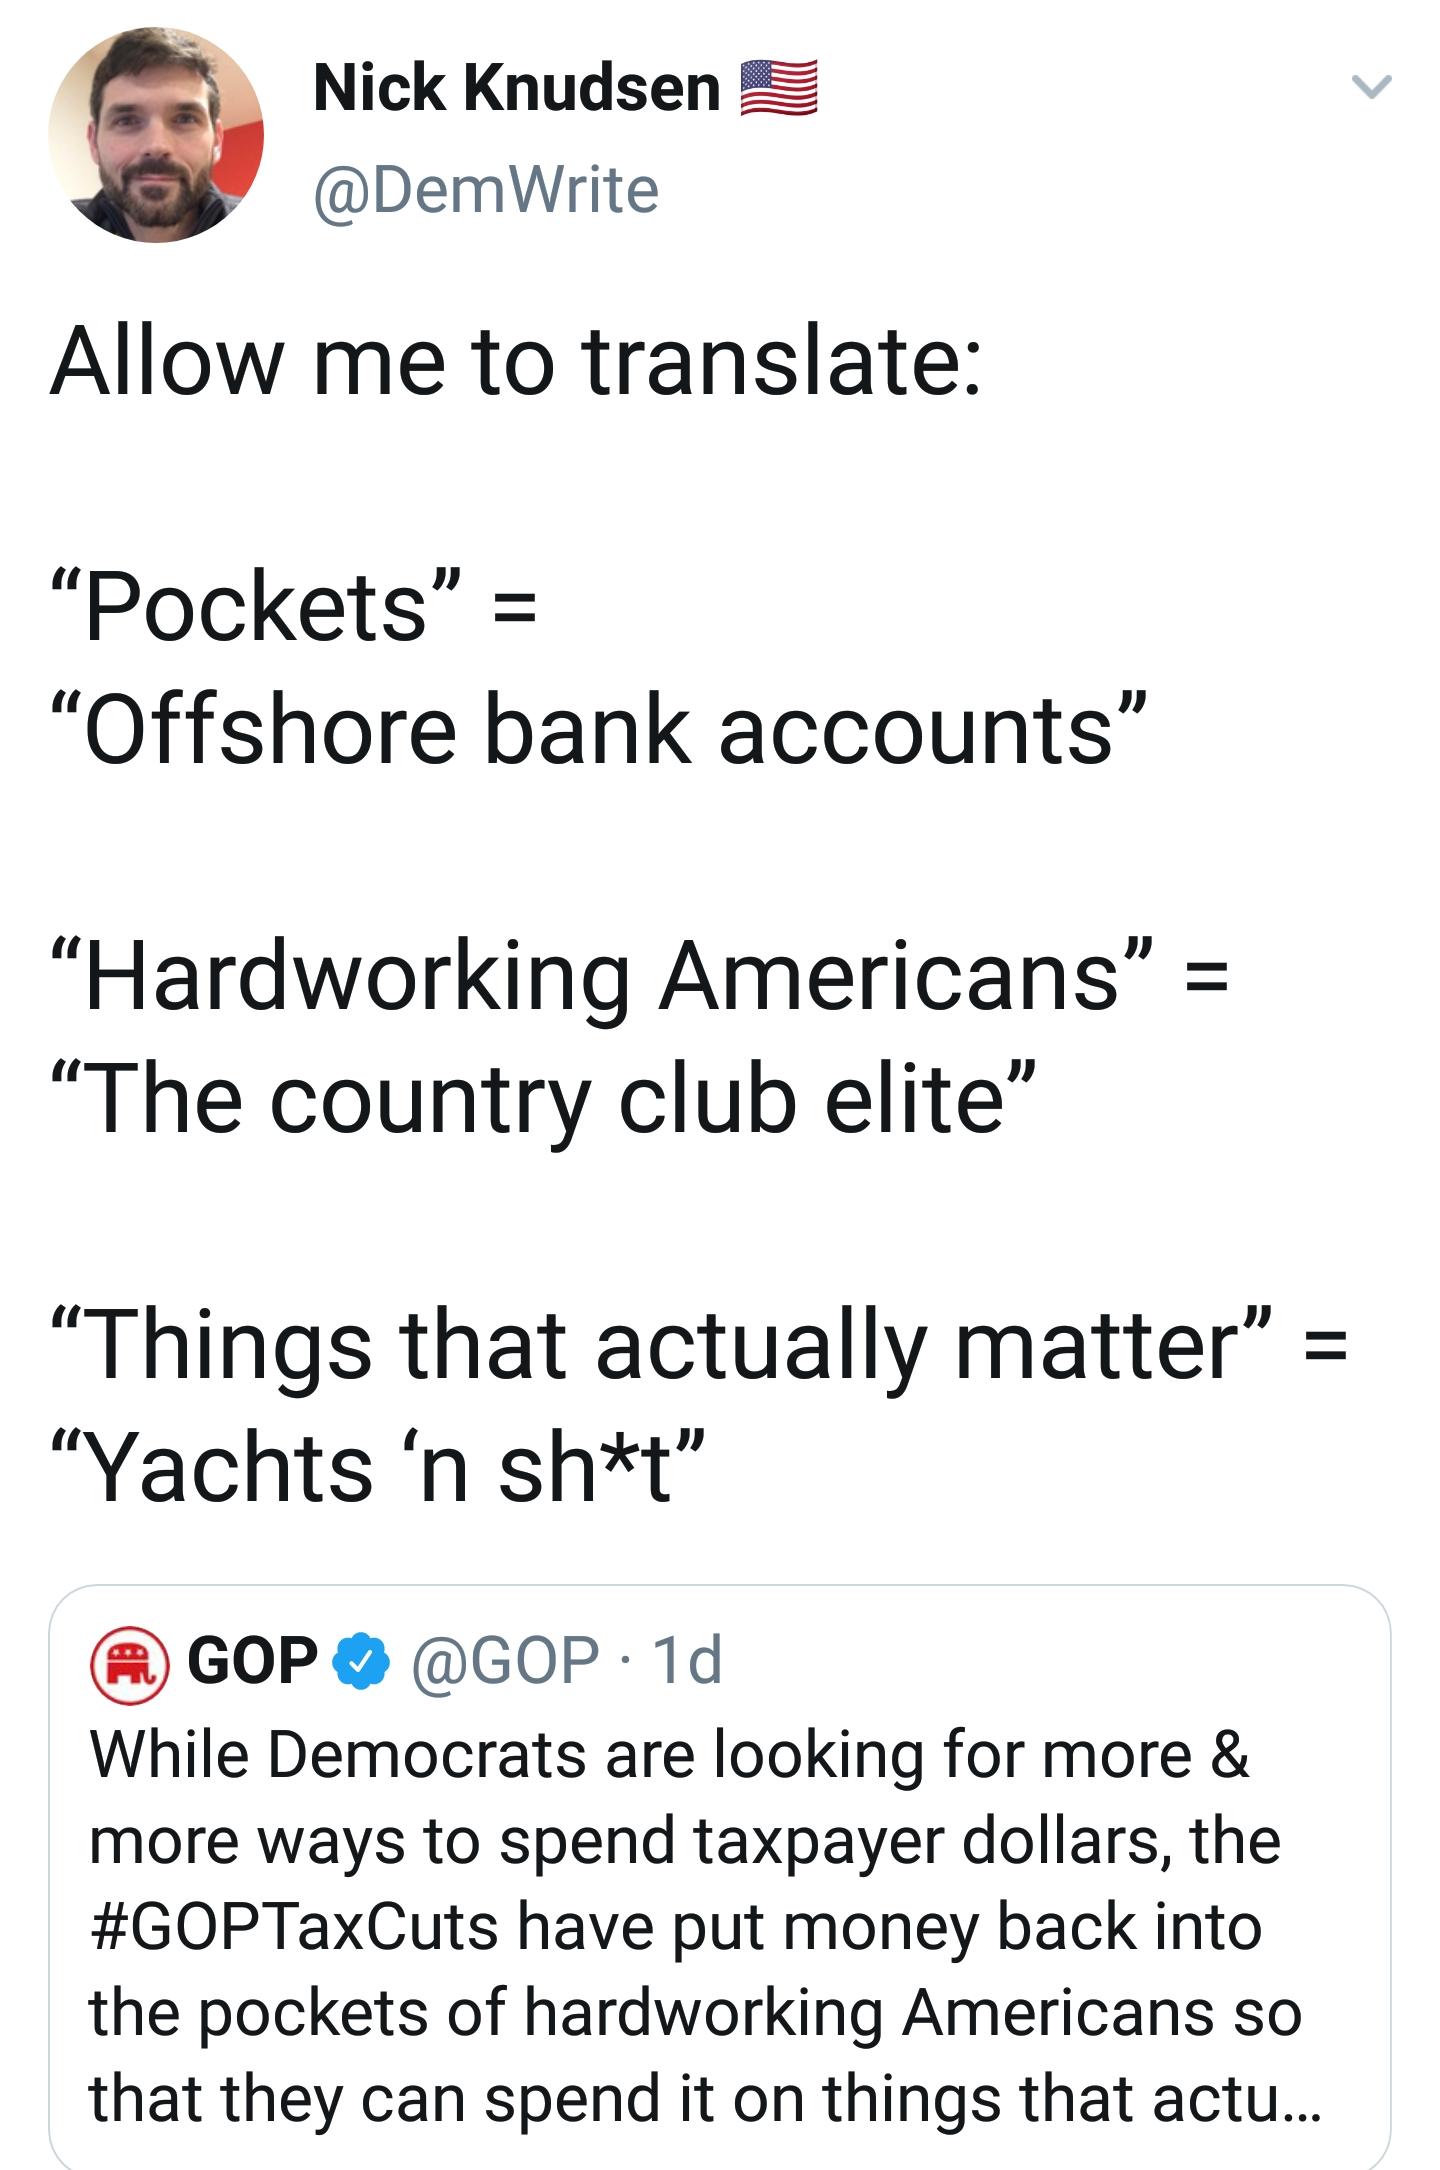 political meme angle - Nick Knudsen Allow me to translate "Pockets" "Offshore bank accounts "Hardworking Americans" "The country club elite" Things that actually matter "Yachts 'n sht" A Gop 1d While Democrats are looking for more & more ways to spend tax